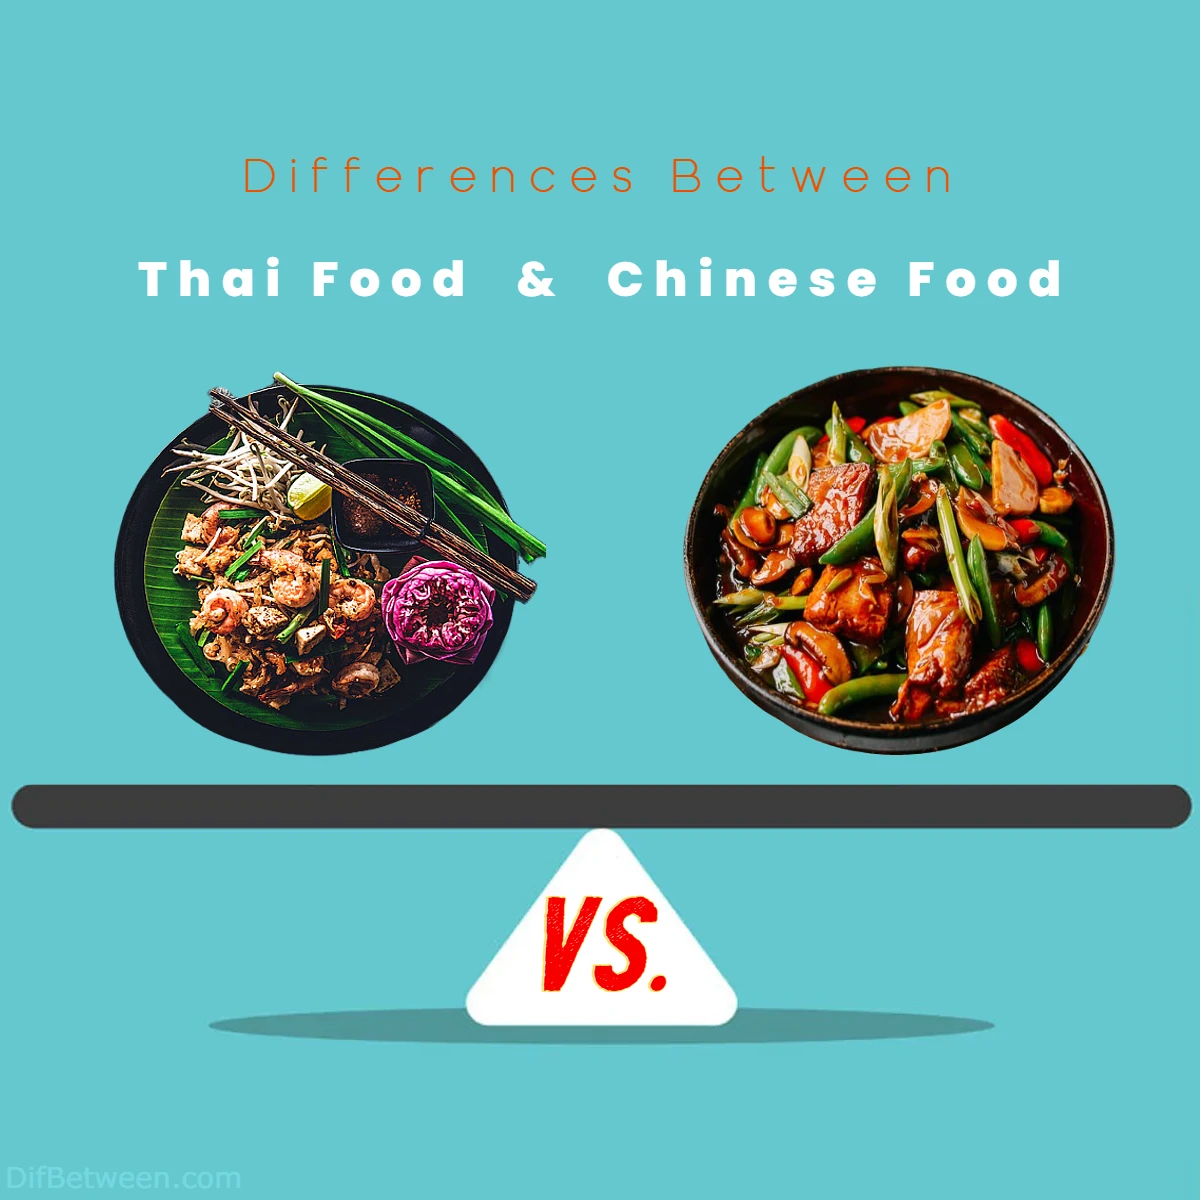 Differences Between Thai Food vs Chinese Food